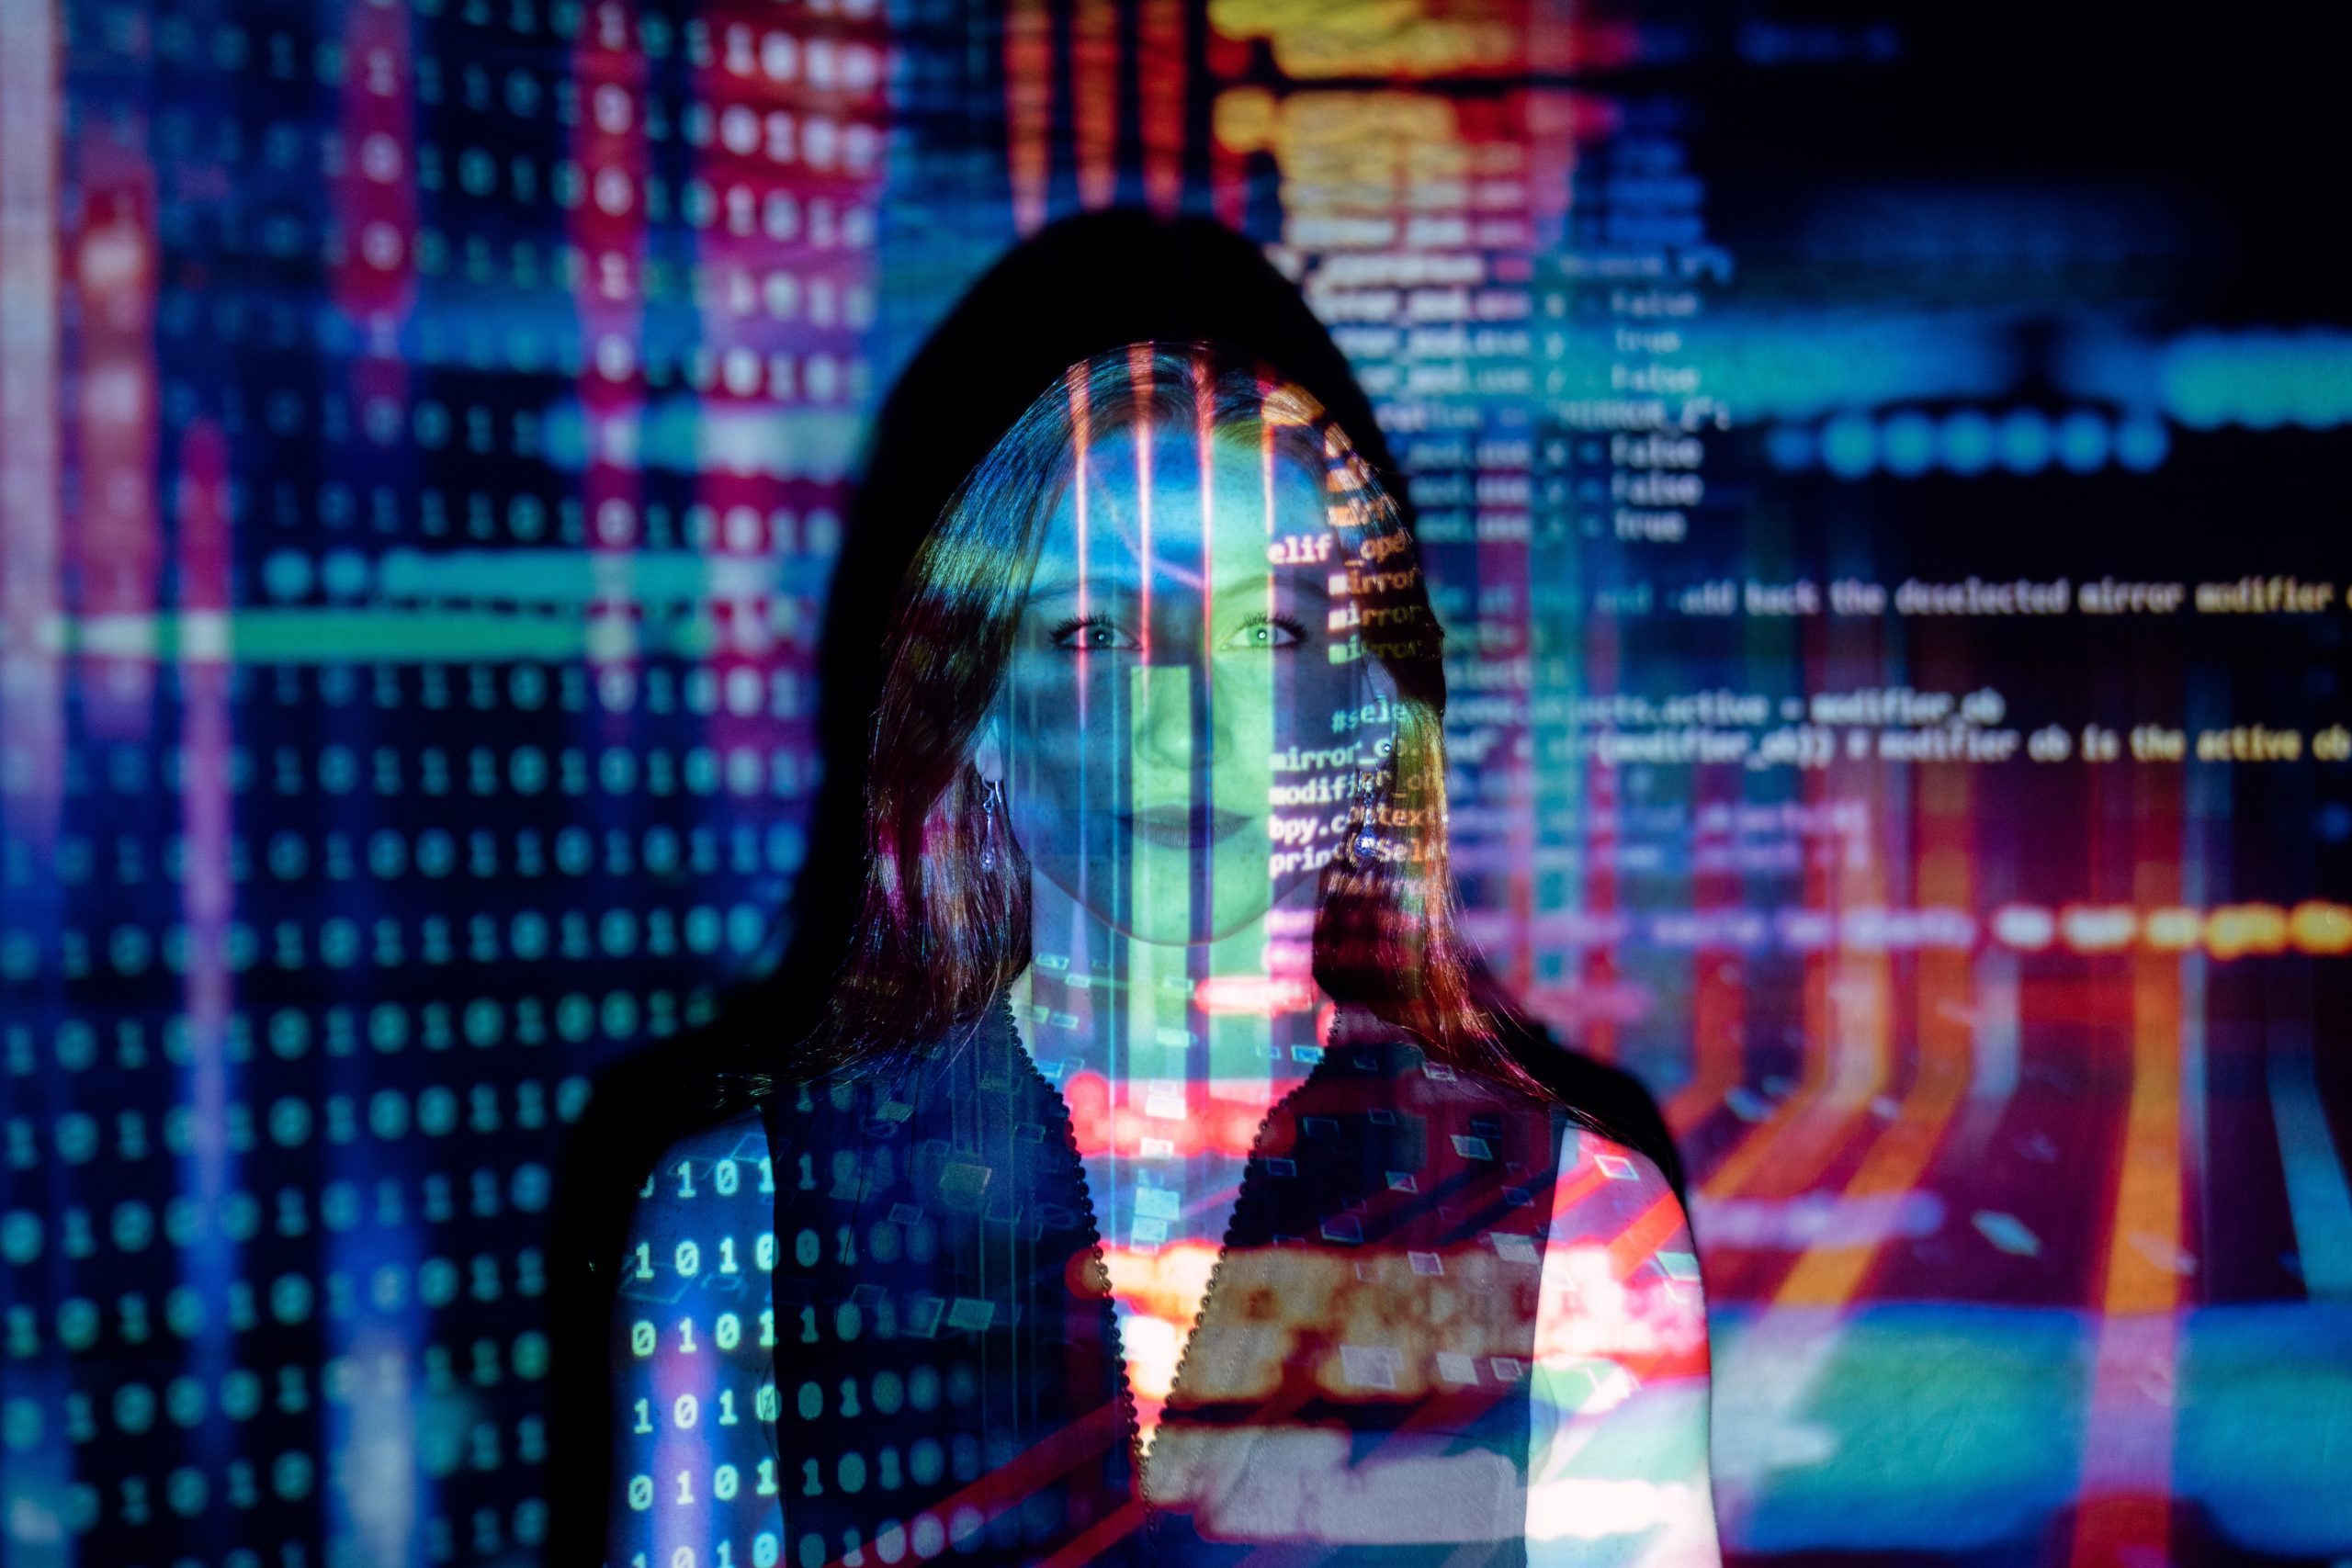 A picture of a woman standing in front of a projector that is shining plenty of alphanumeric strings across her face and the wall behind her. Like database security, any data administrator knows the amount of sheer information involved in managing database servers.